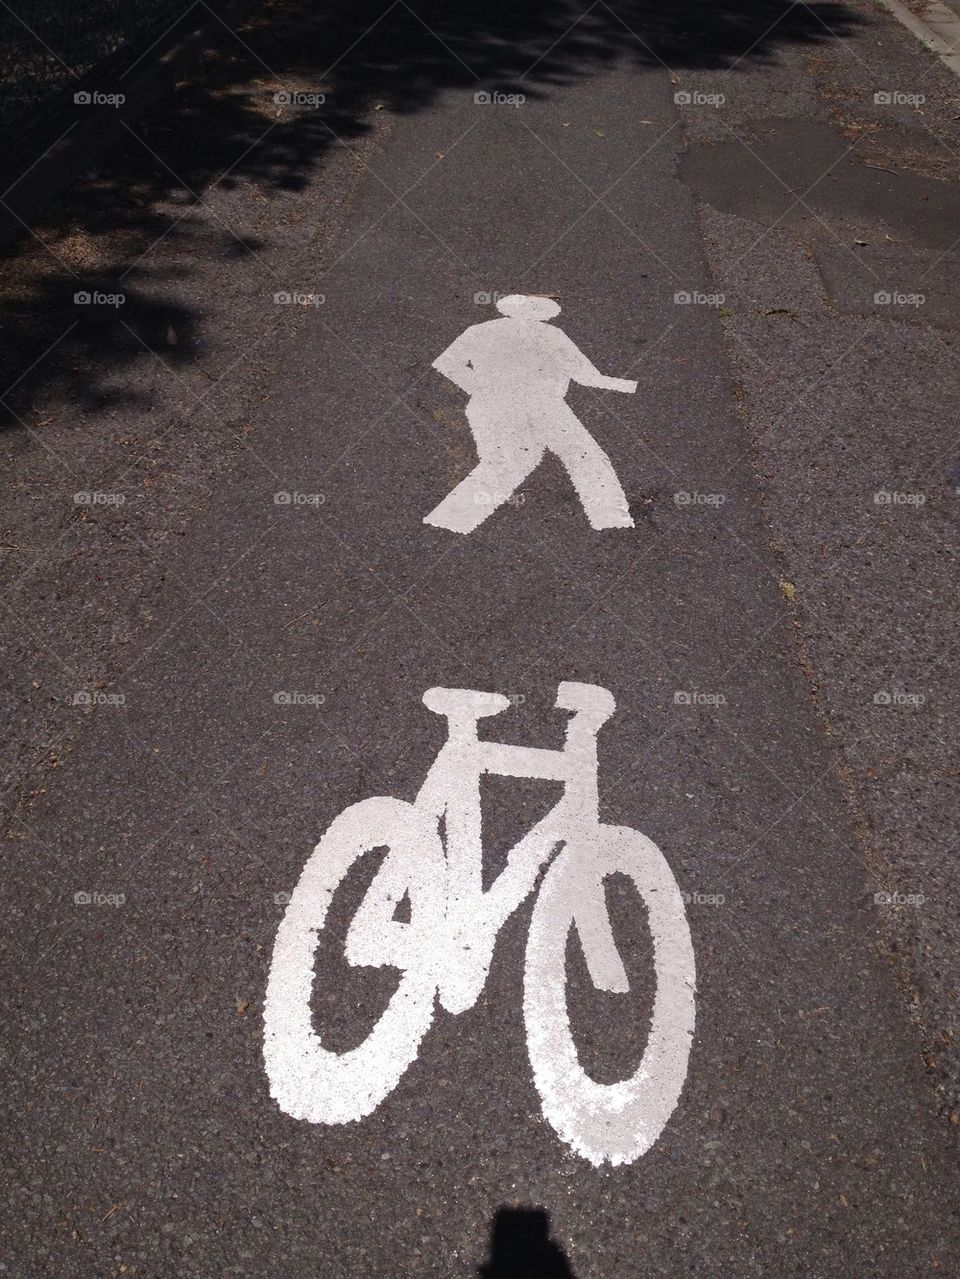 The Walk - a public lane for walking and cycling.